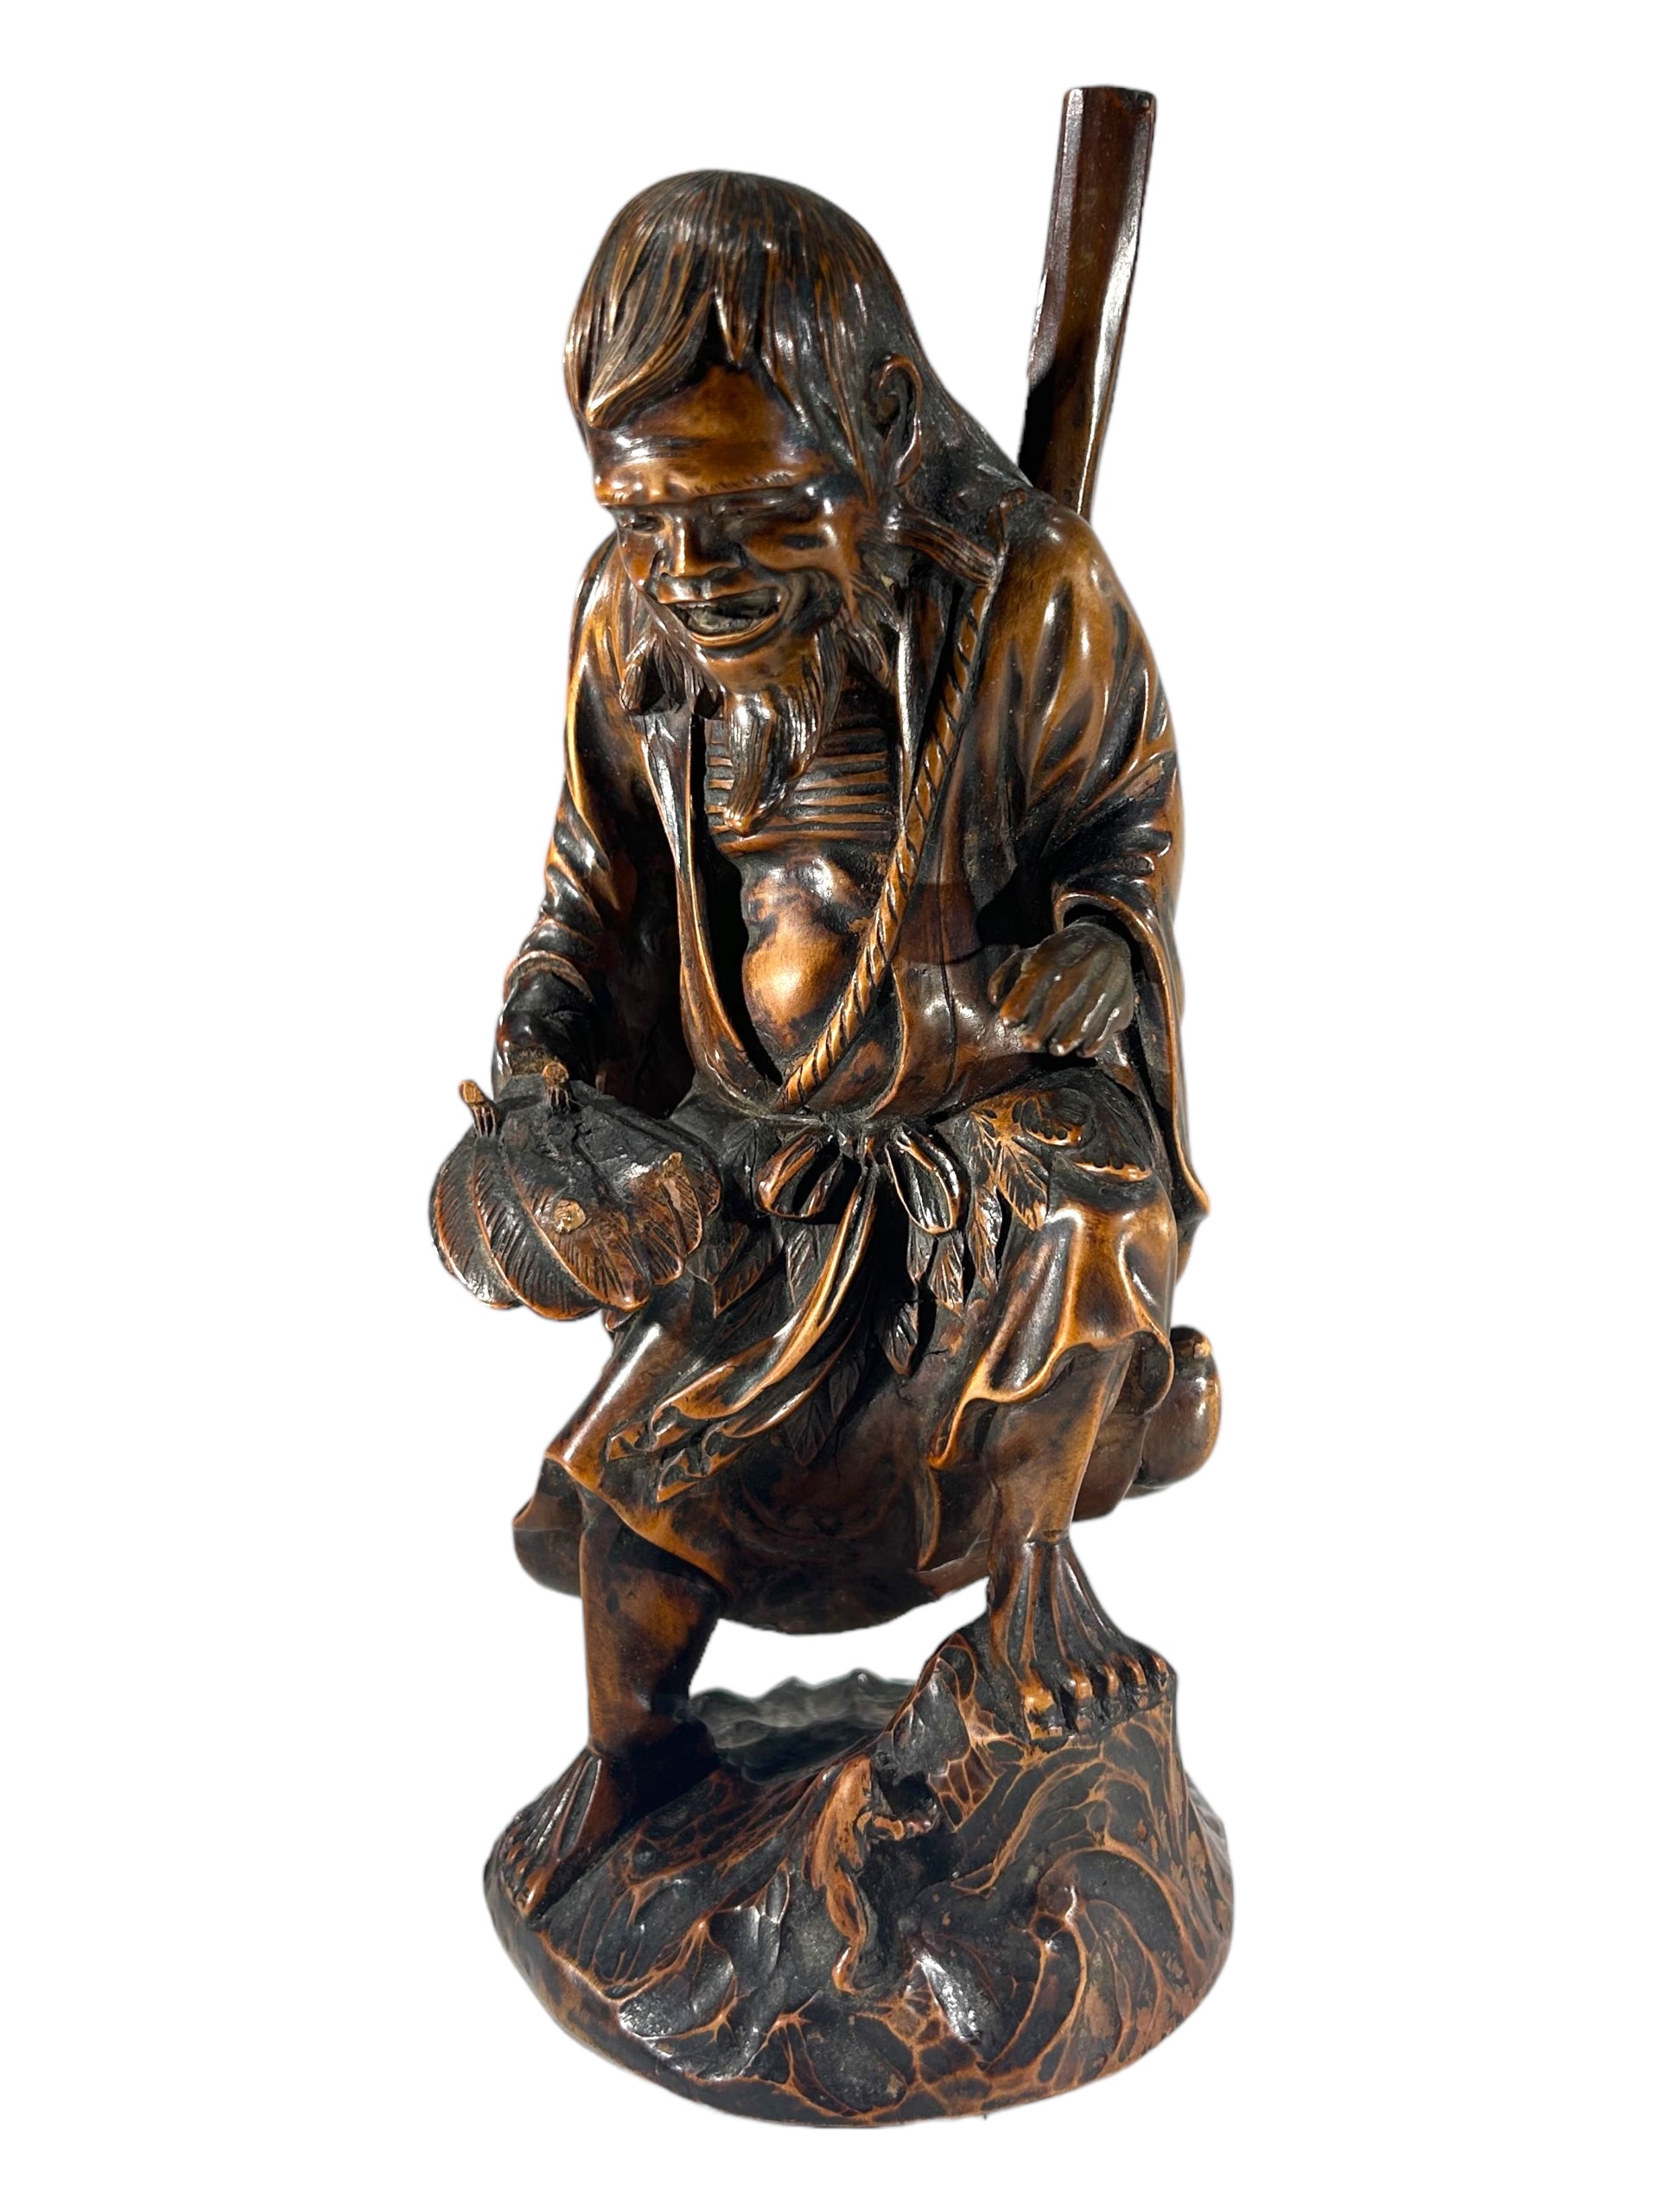 A JAPANESE MEIJI PERIOD CARVED WOODEN FIGURE OF THE DAOIST IMMORTAL, GAMA SENNIN WITH FROG Marked